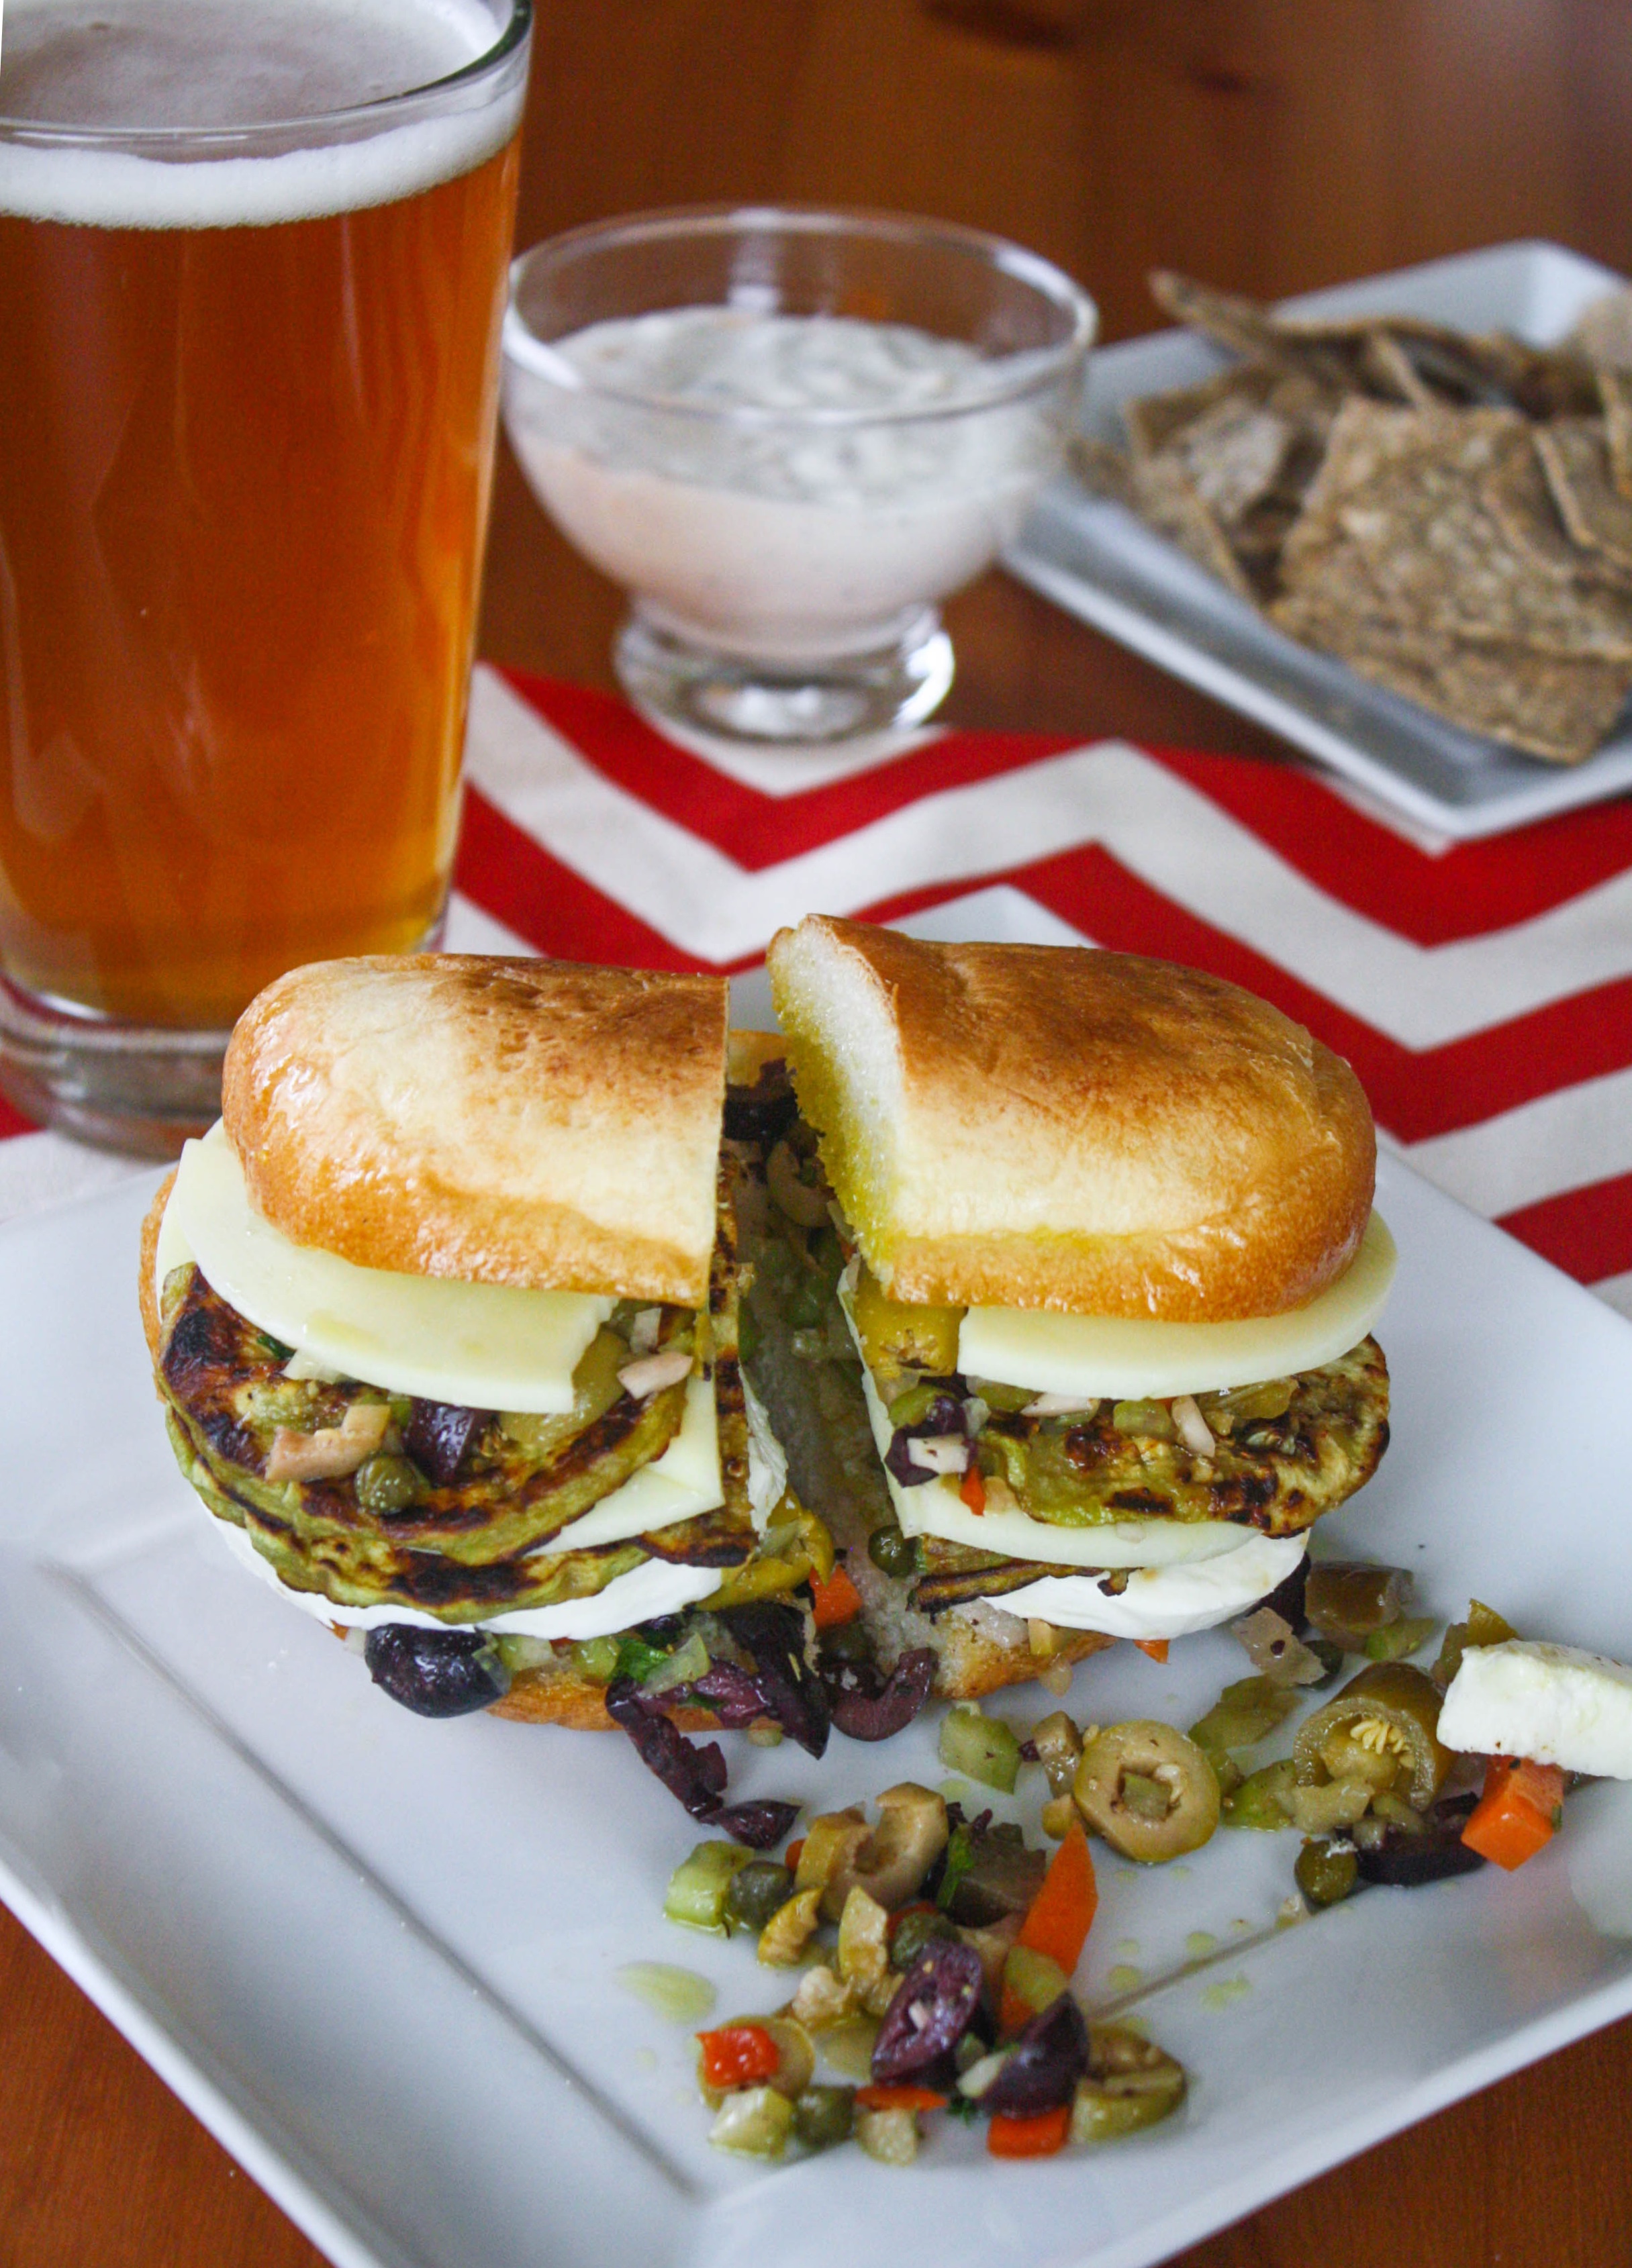 Eggplant Muffuletta Sandwiches are a meatless version of the classic. You'll love these vegetarian muffuletta sandwiches stuffed with eggplant.